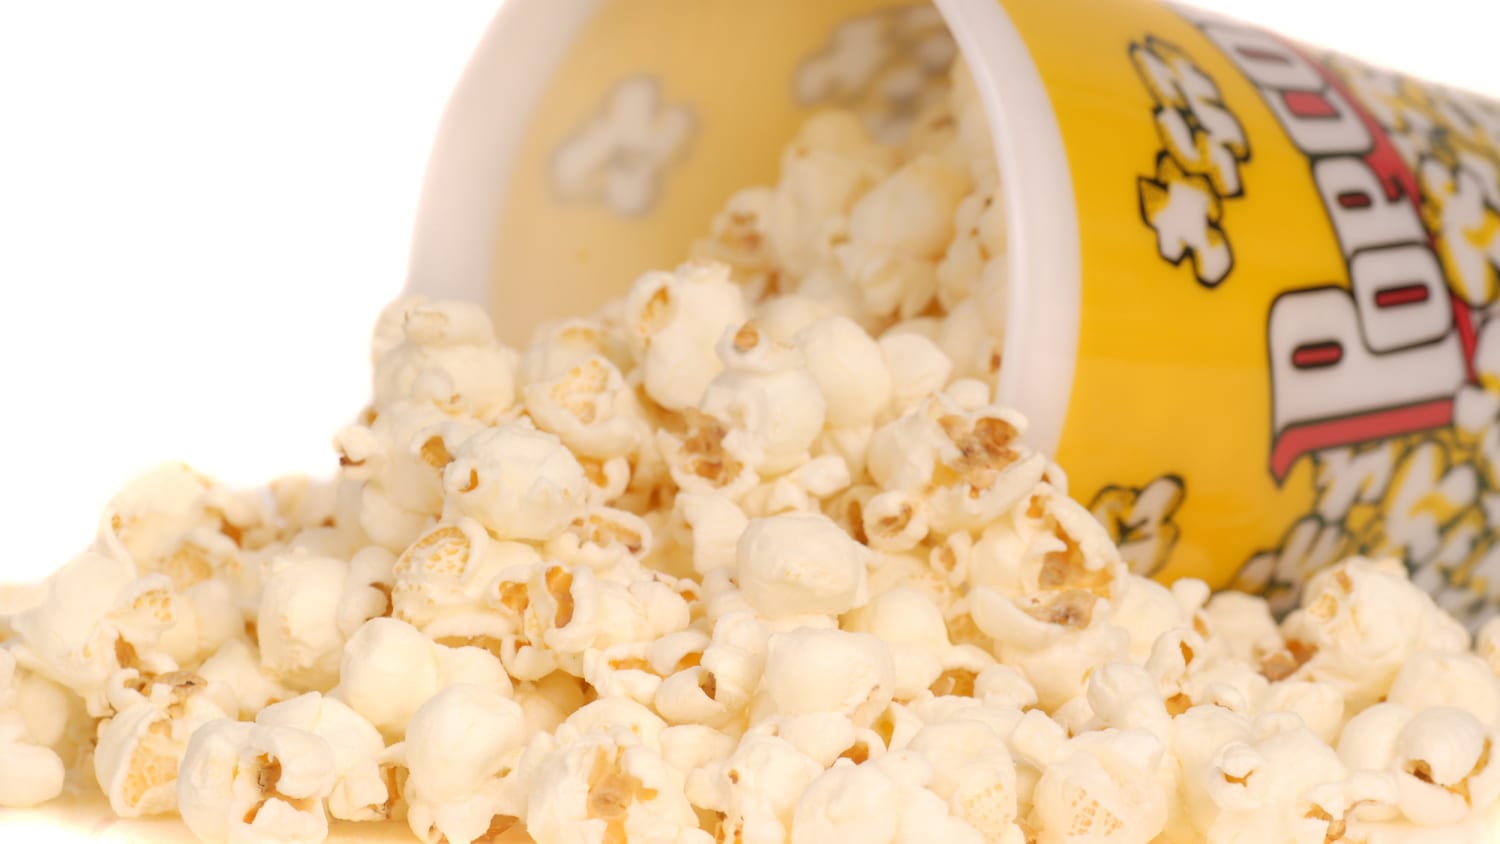 can you have popcorn on the cadidiasis diet